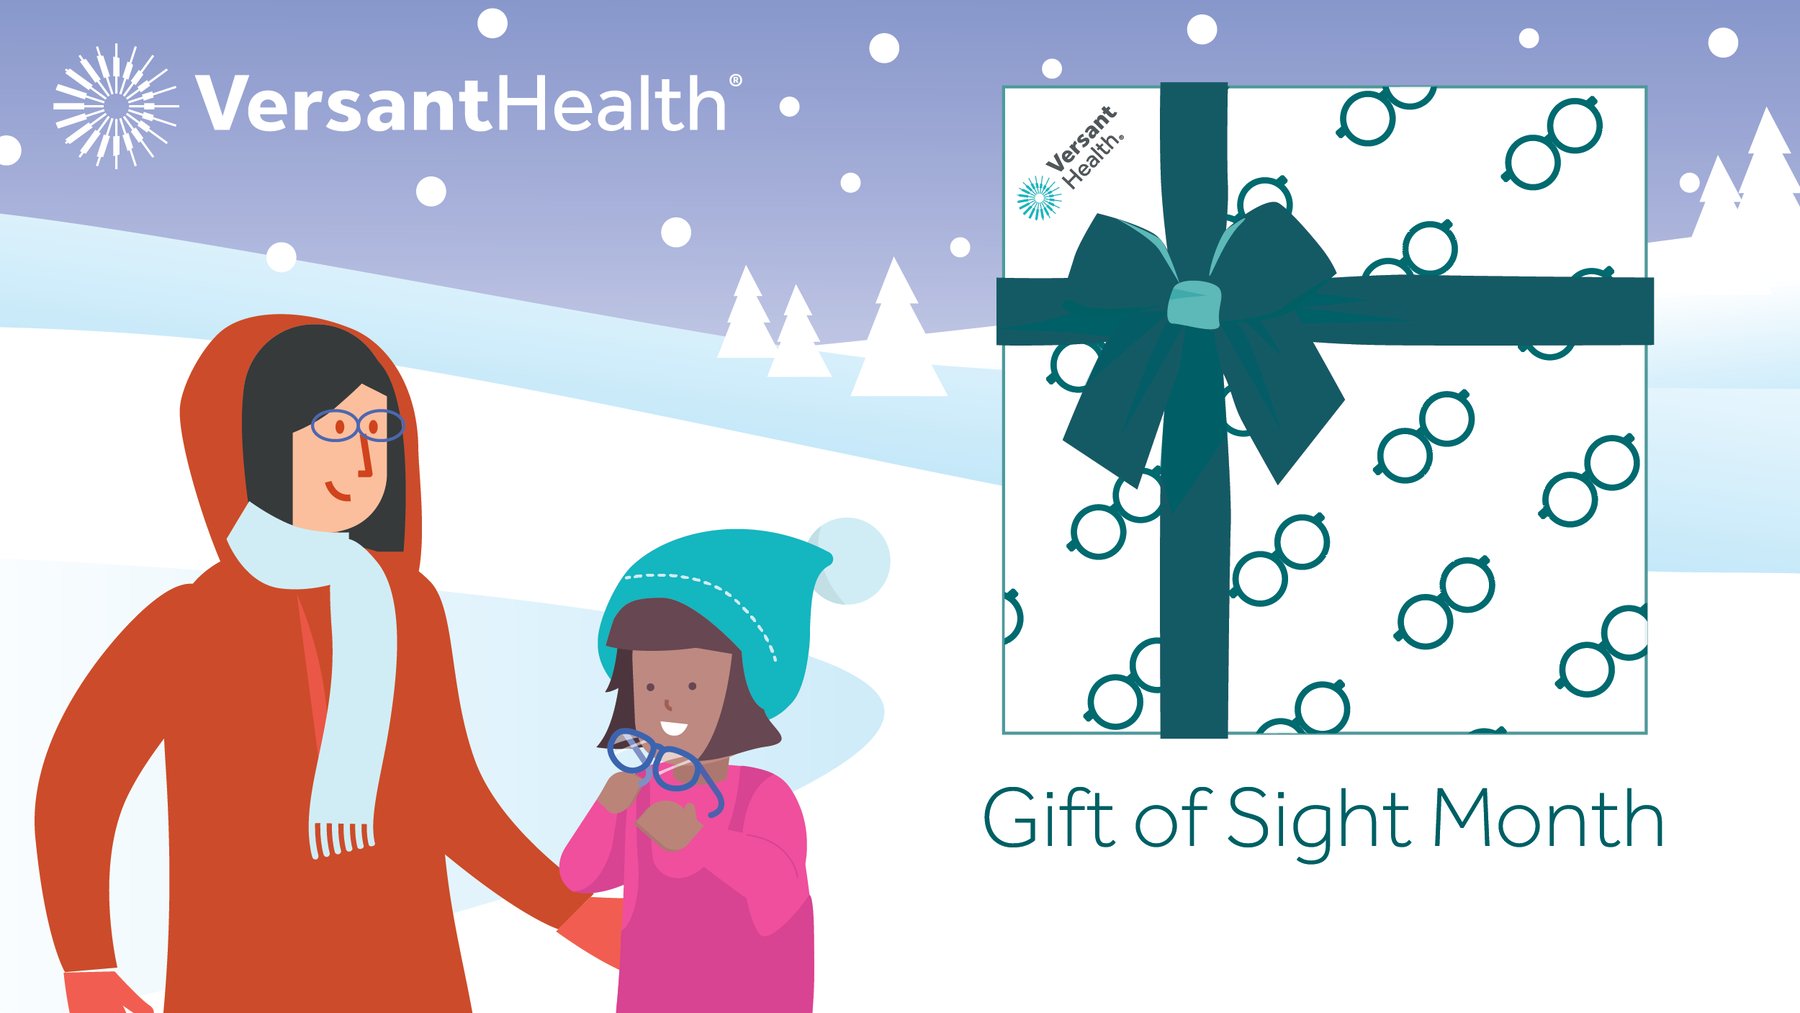 Give the gift of sight — Schedule an eye exam today!